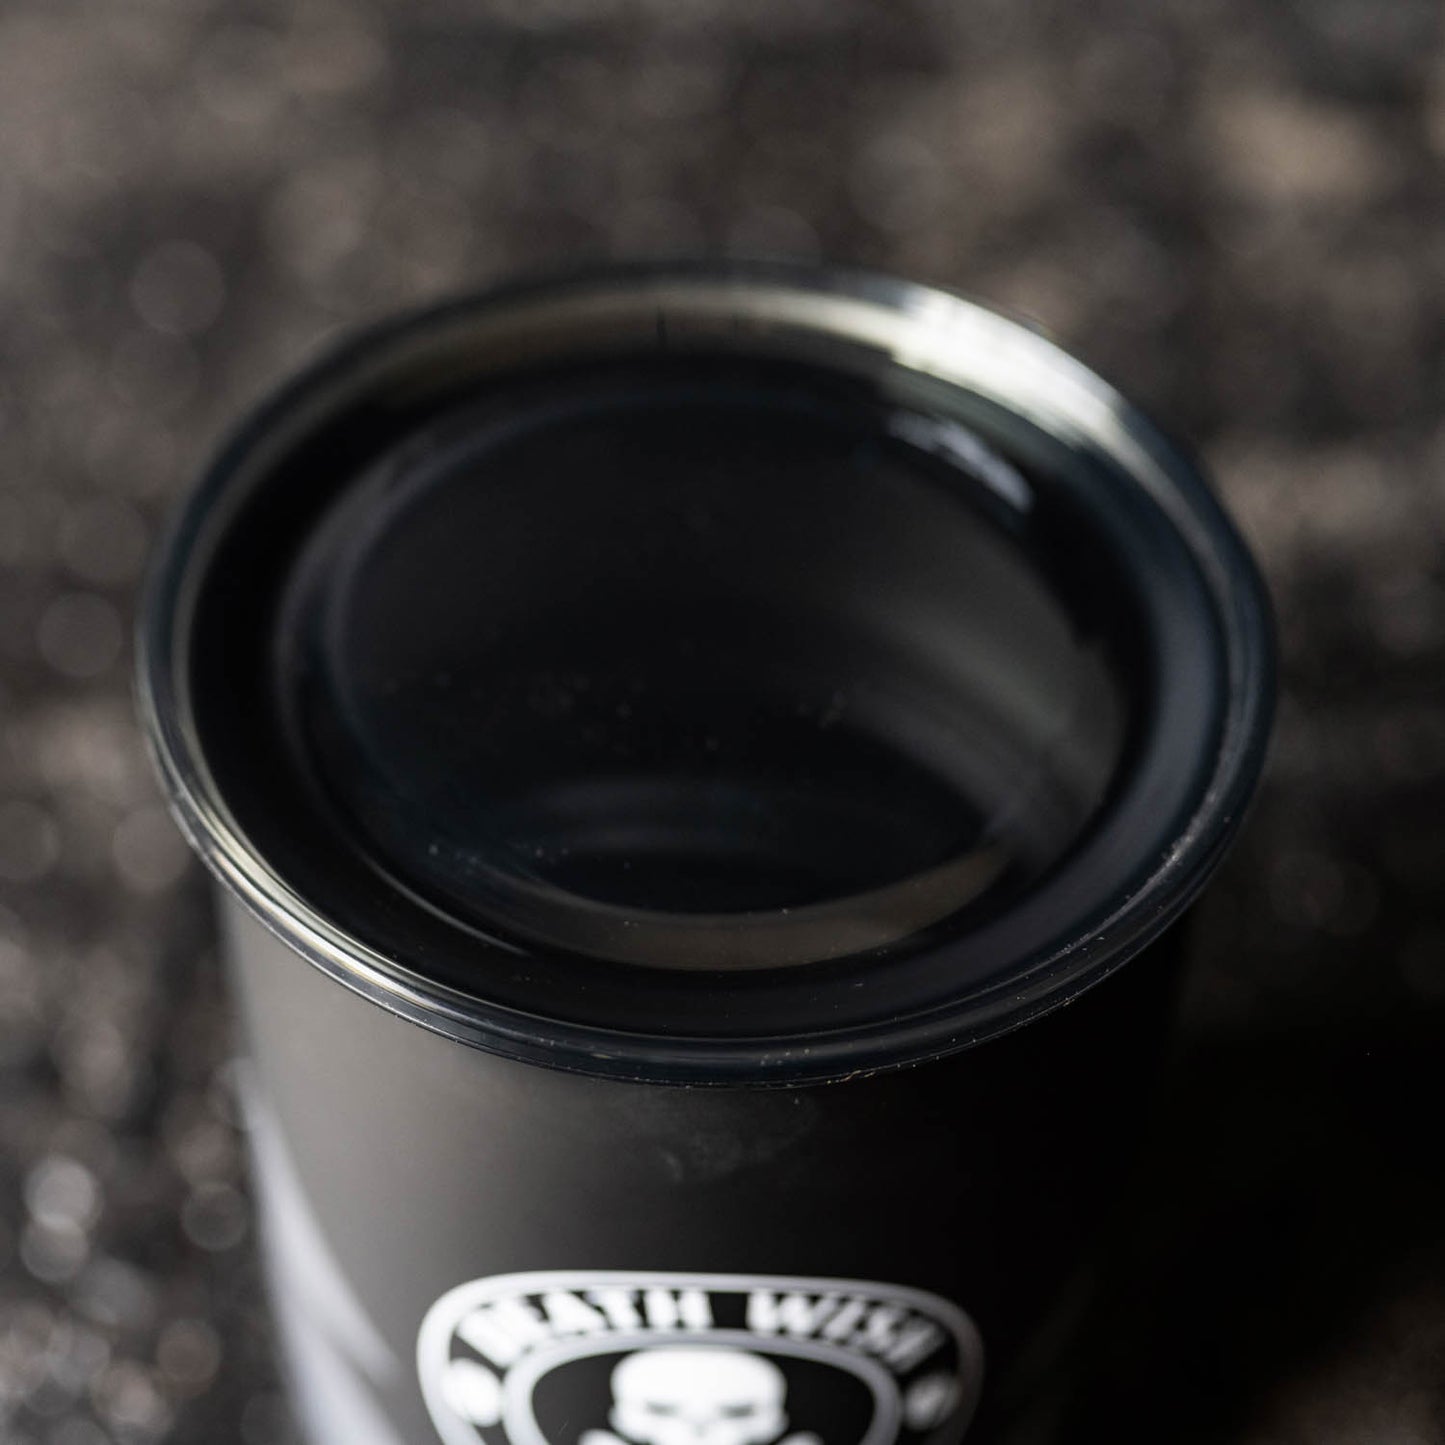 Death Wish Coffee Shadow Canister Lid Detail